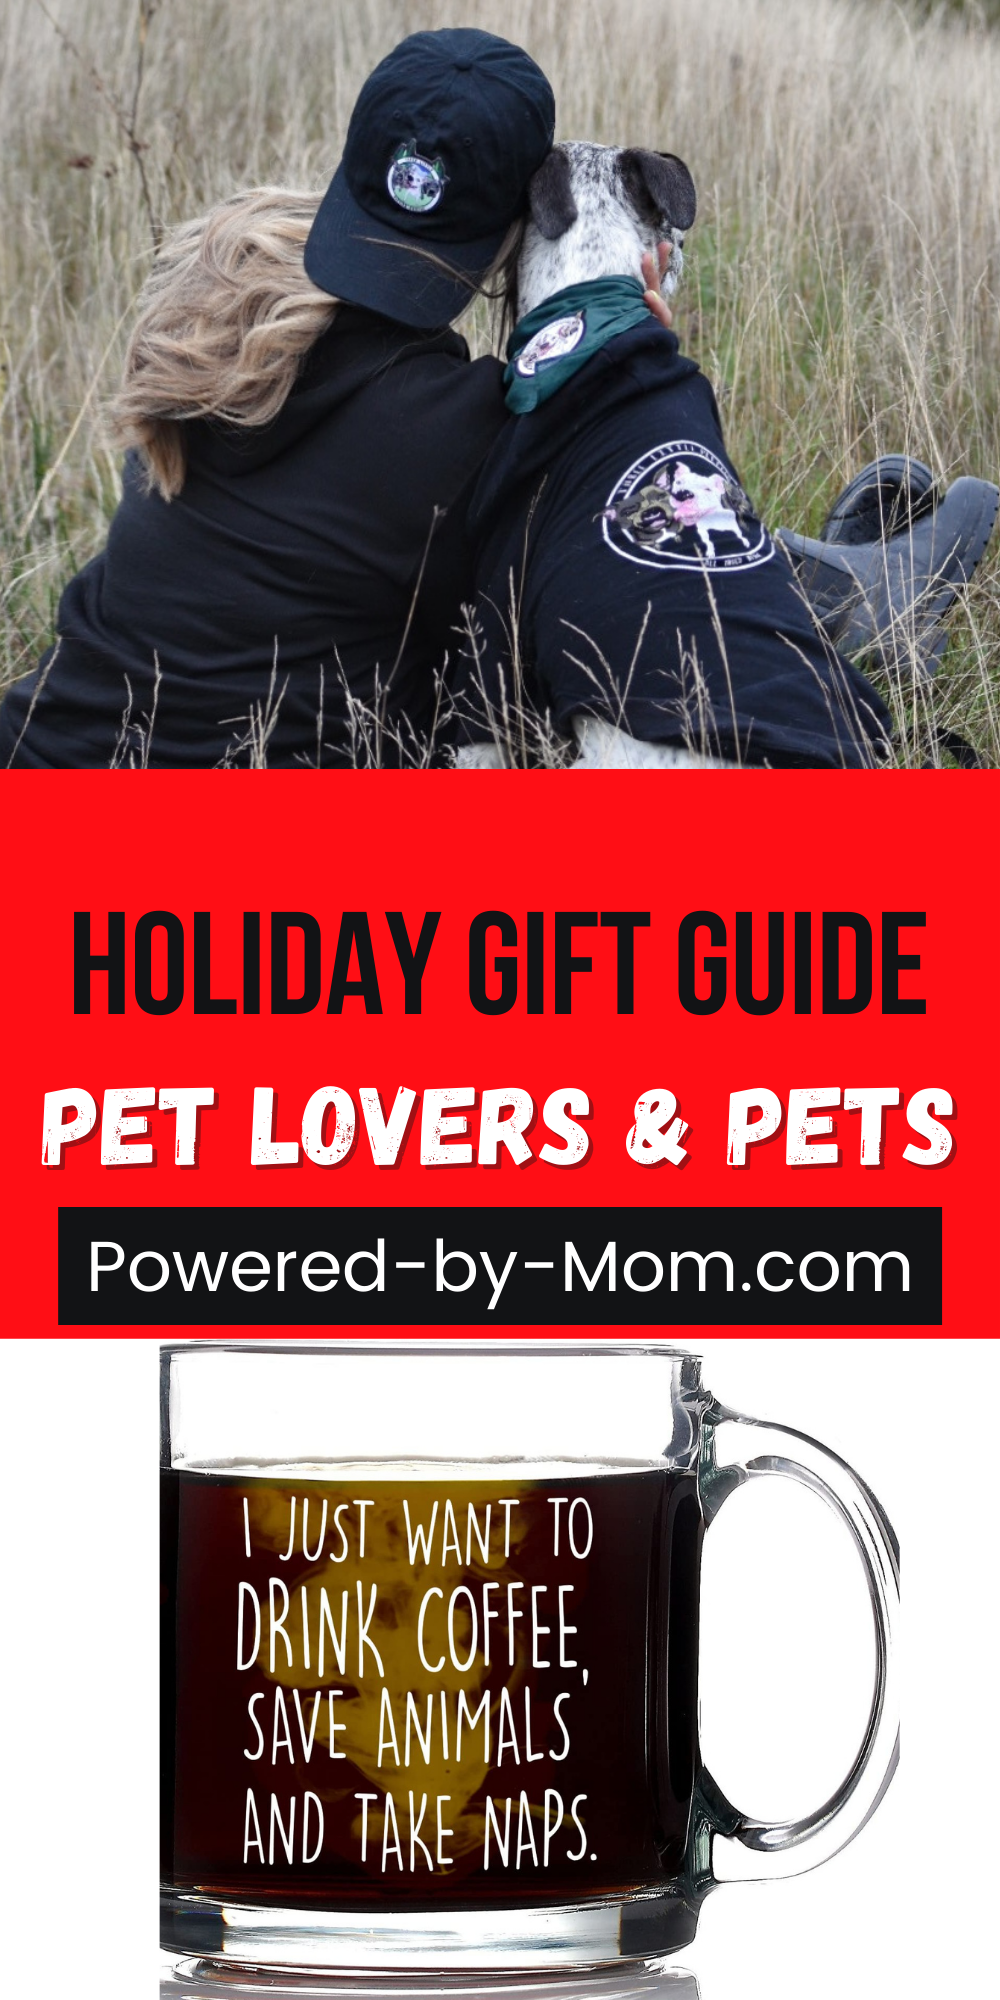 We know for many like us our pets are family so we need to celebrate them and the people who love them so there's gift ideas for pet lovers too.